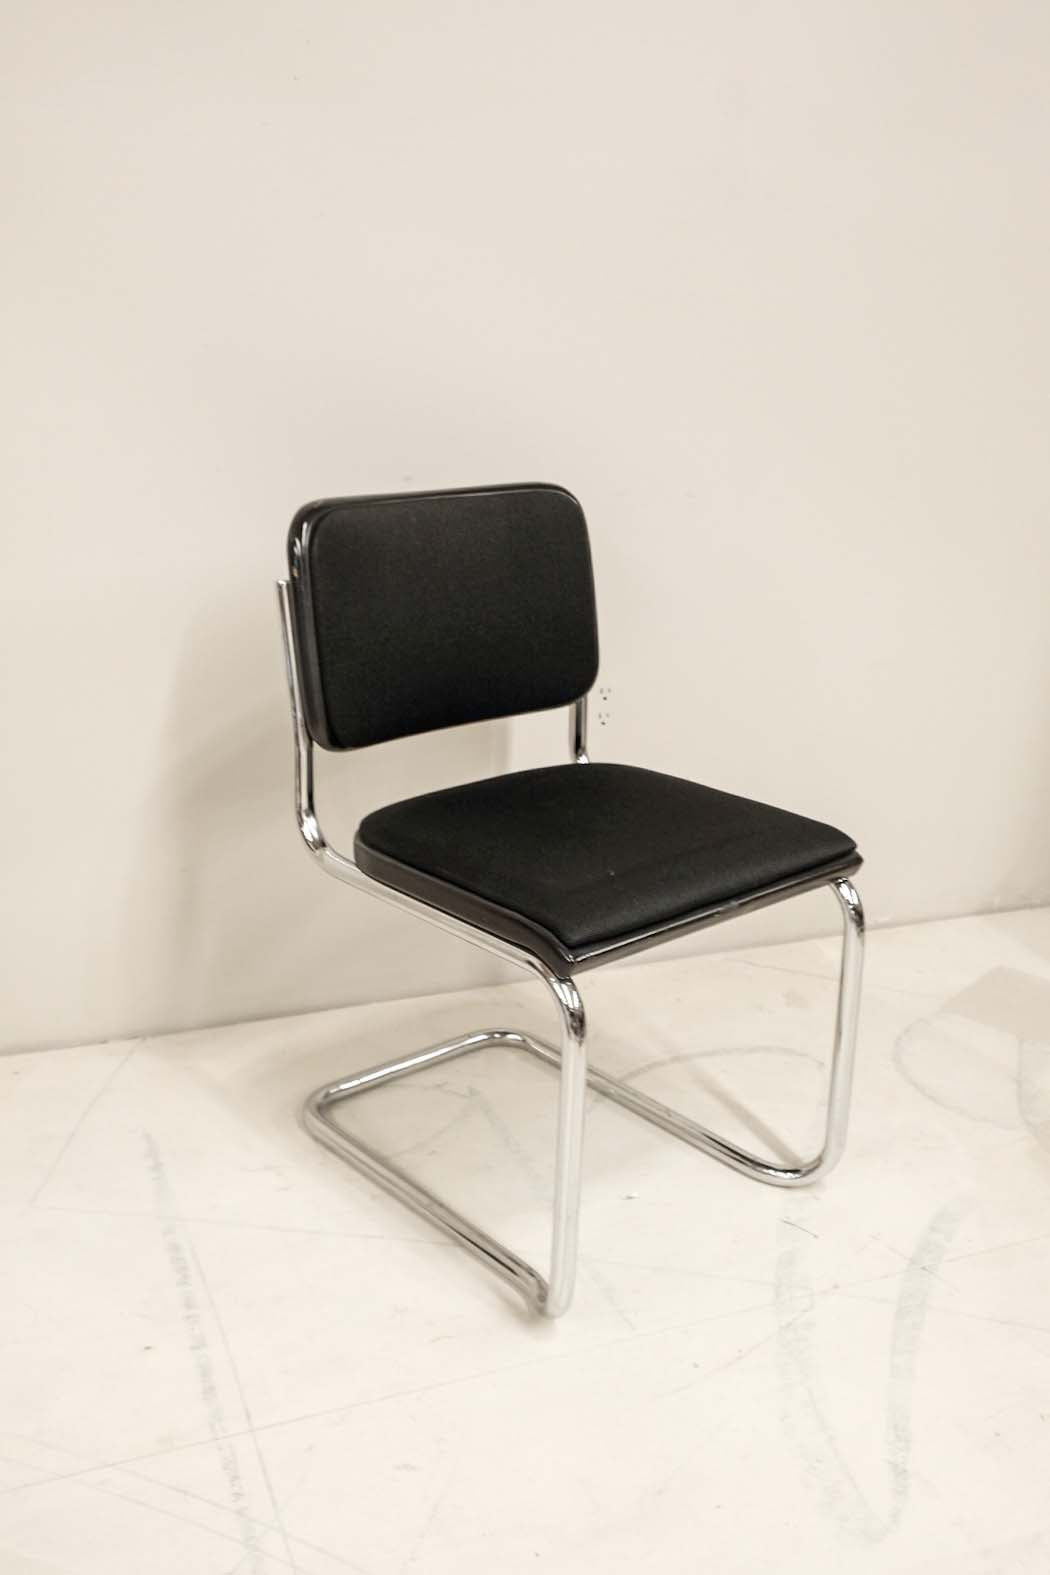 Marcel Breuer Upholstered Thonet Cesca Armless Chairs